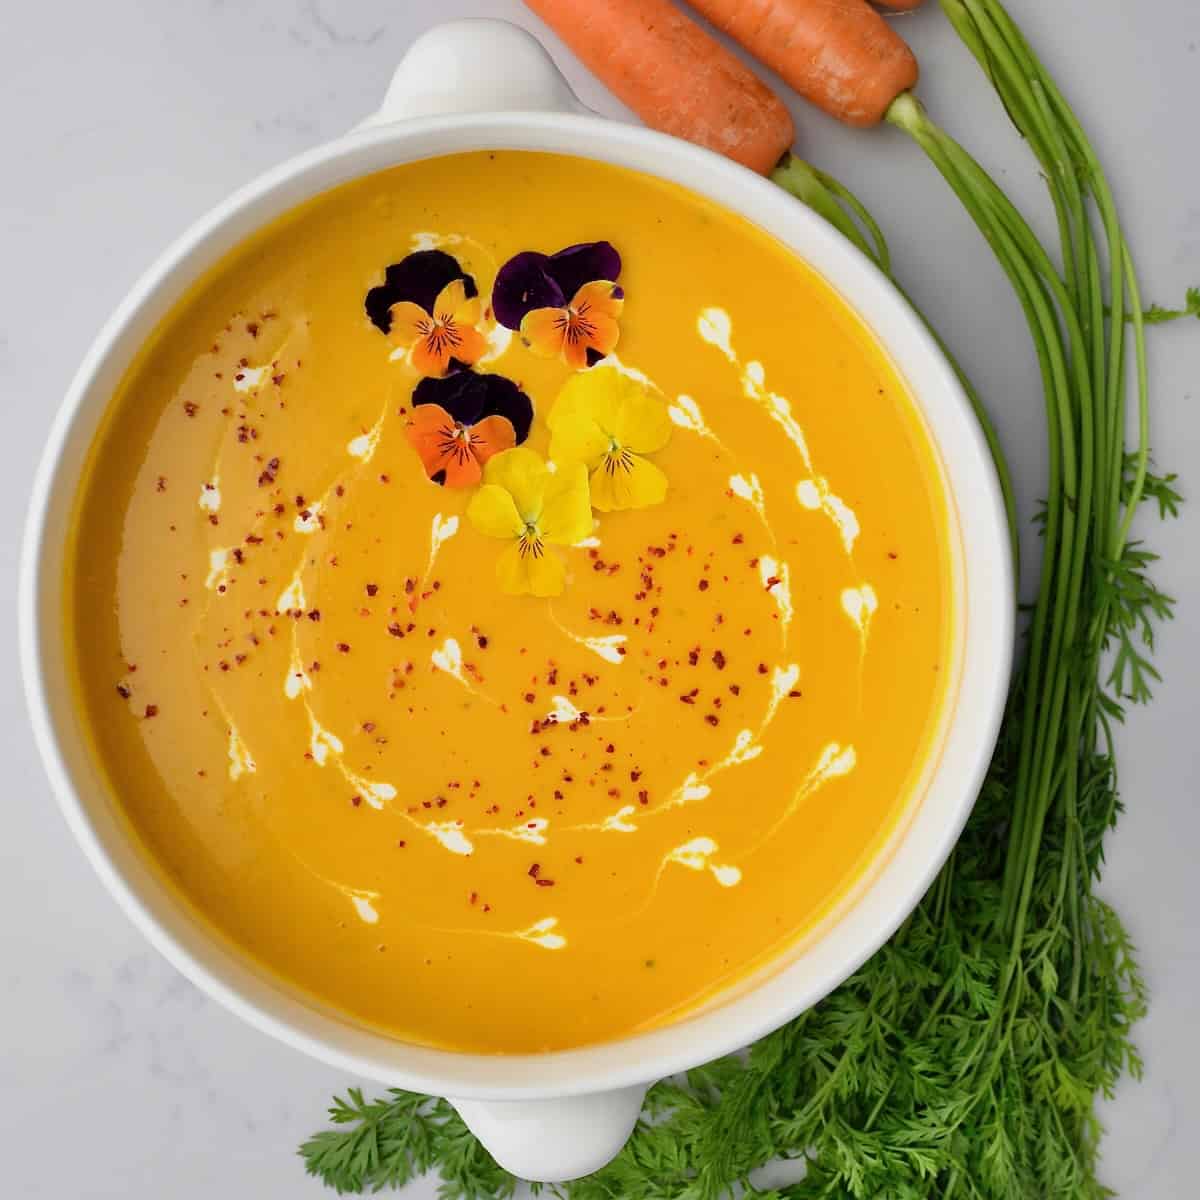 https://www.alphafoodie.com/wp-content/uploads/2022/02/Carrot-Ginger-Soup-square2.jpeg